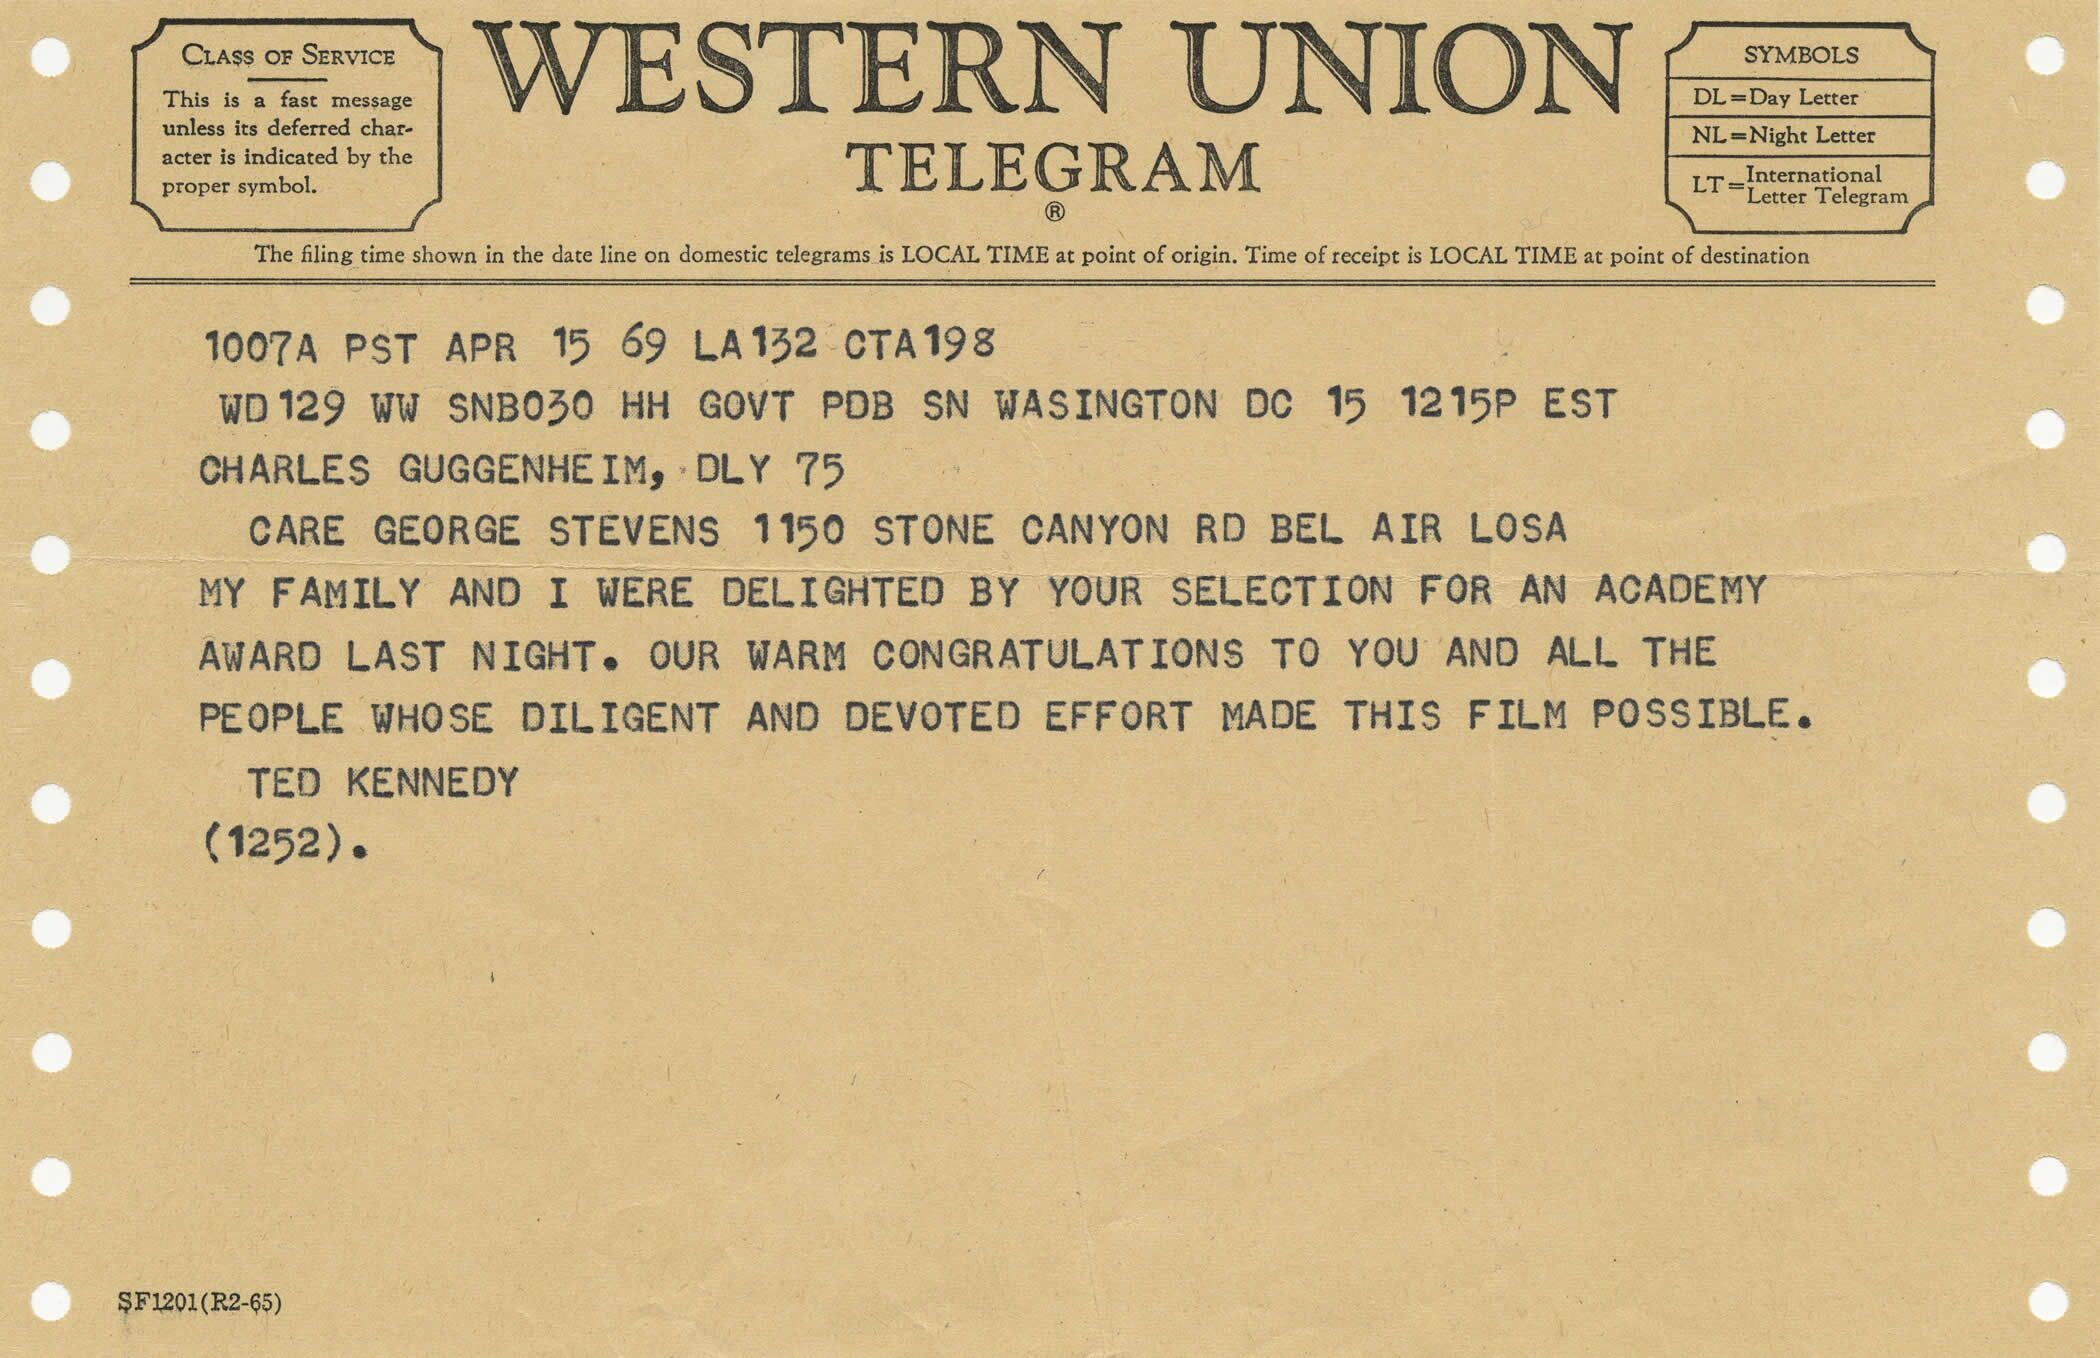 Telegram from Ted Kennedy to Charles Guggenheim, April 15, 1969